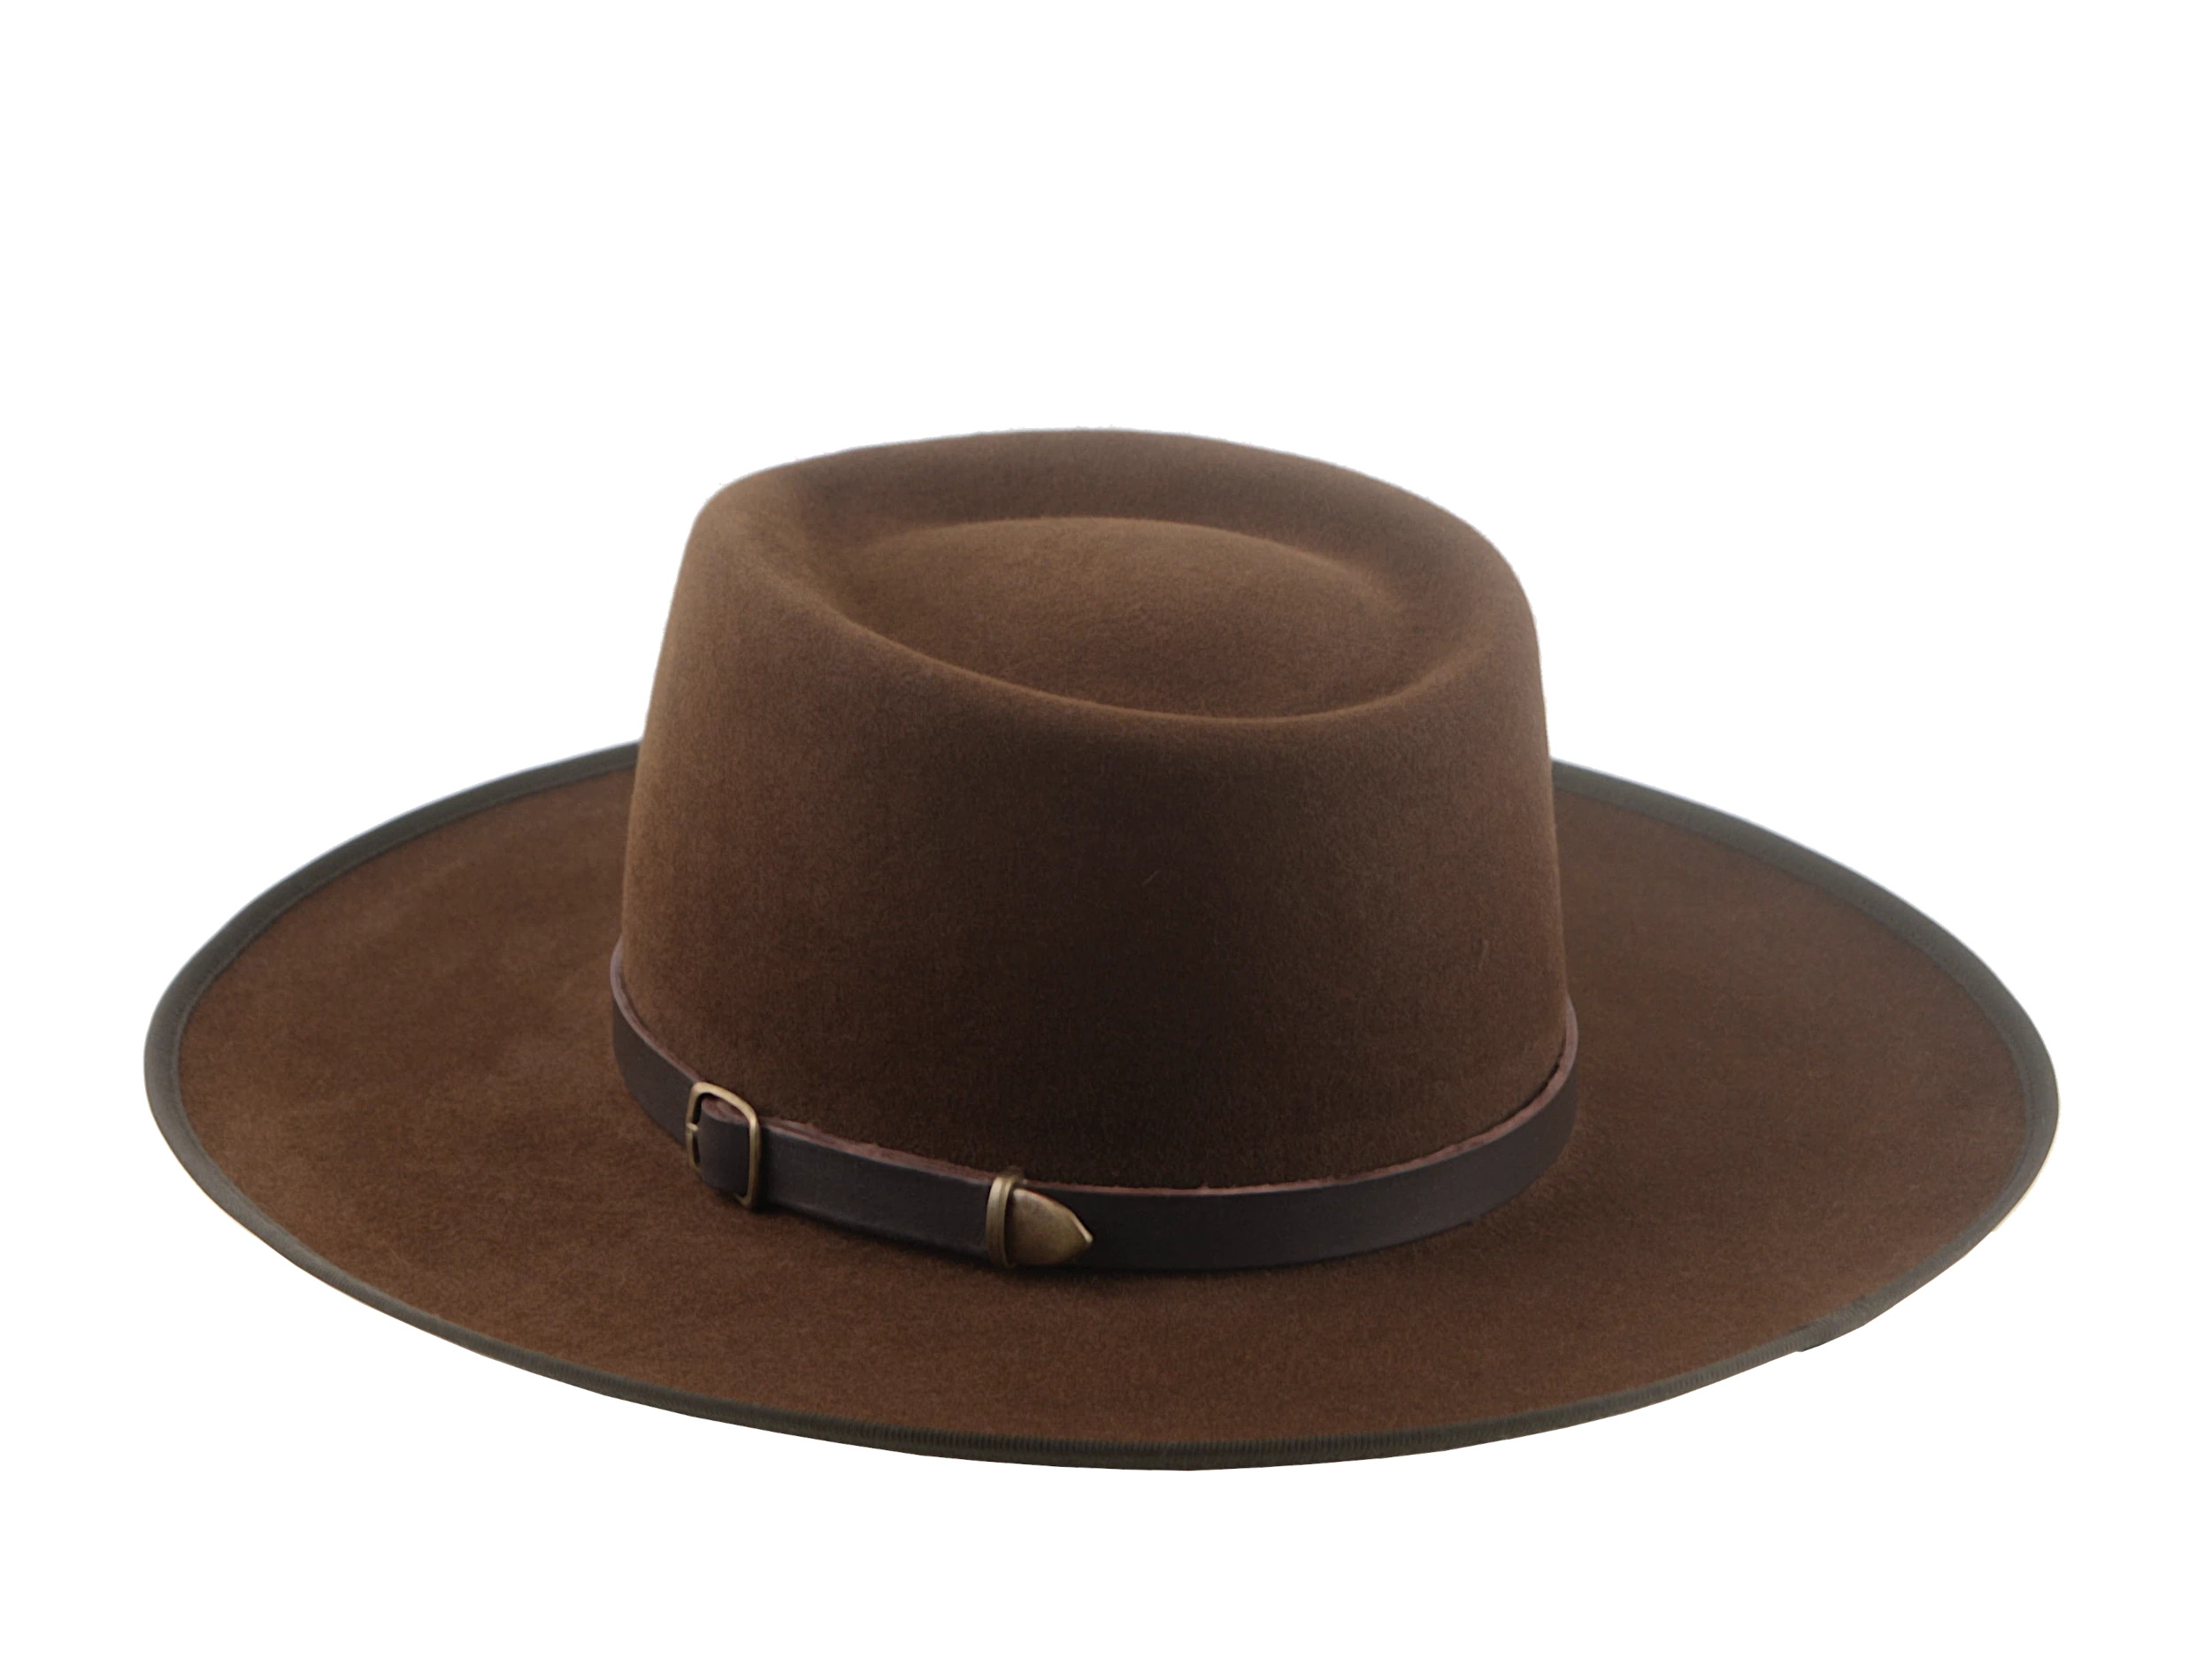 The Renegade: Perspective showing the depth and shape of the cowboy hat | Agnoulita Hats